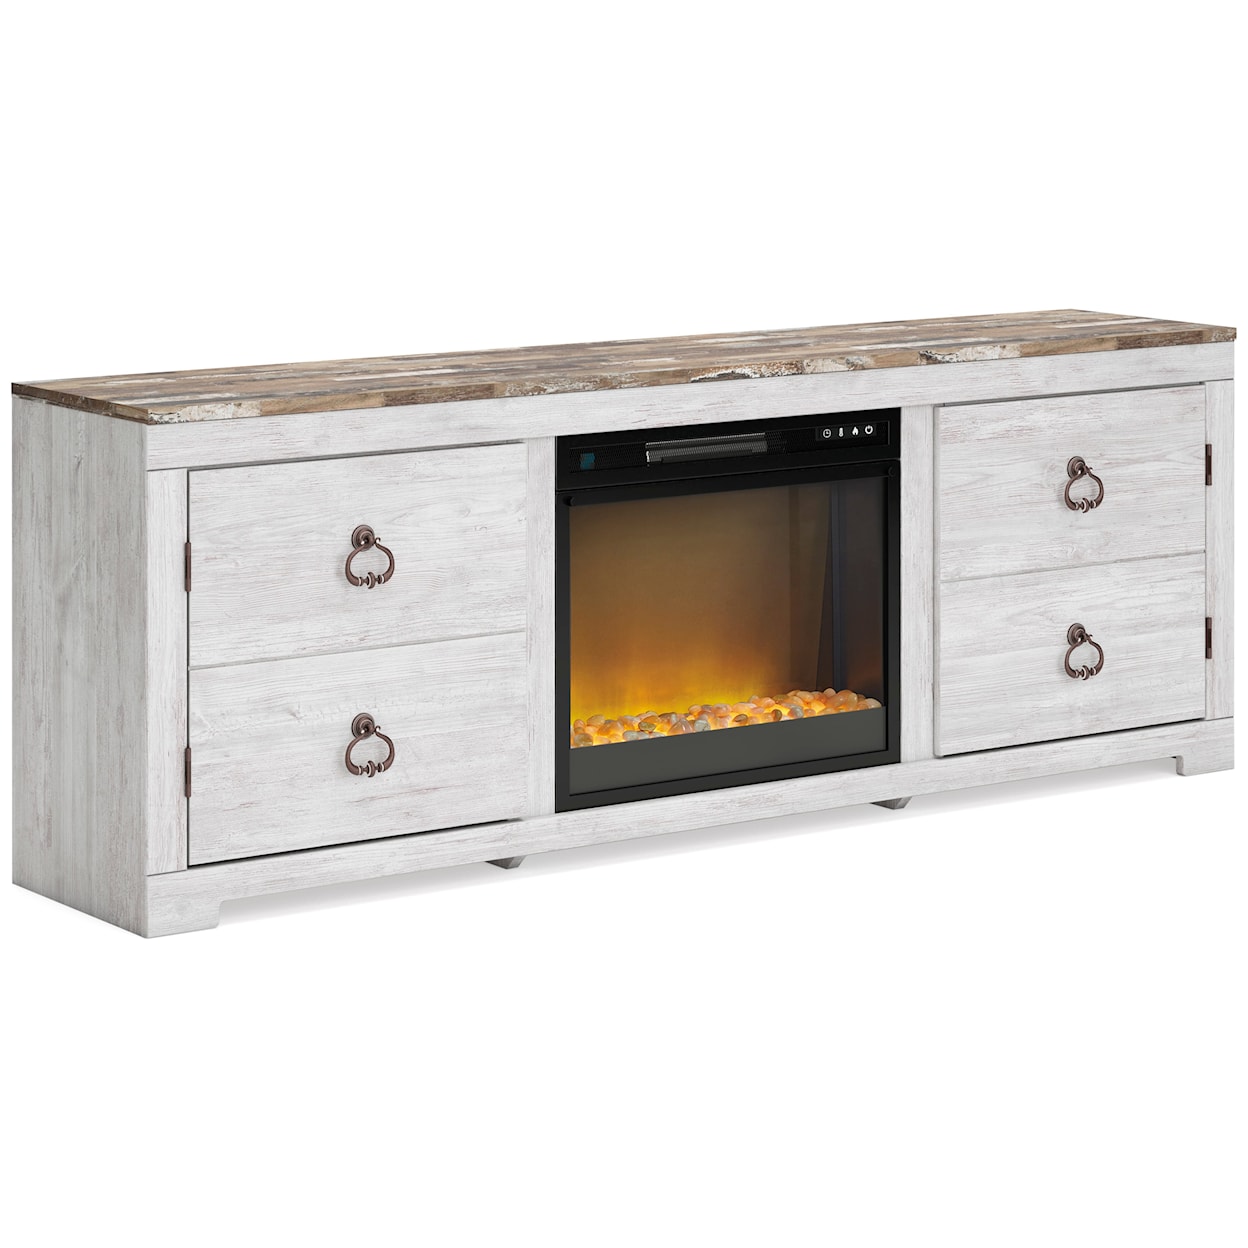 Benchcraft Willowton TV Stand with Fireplace